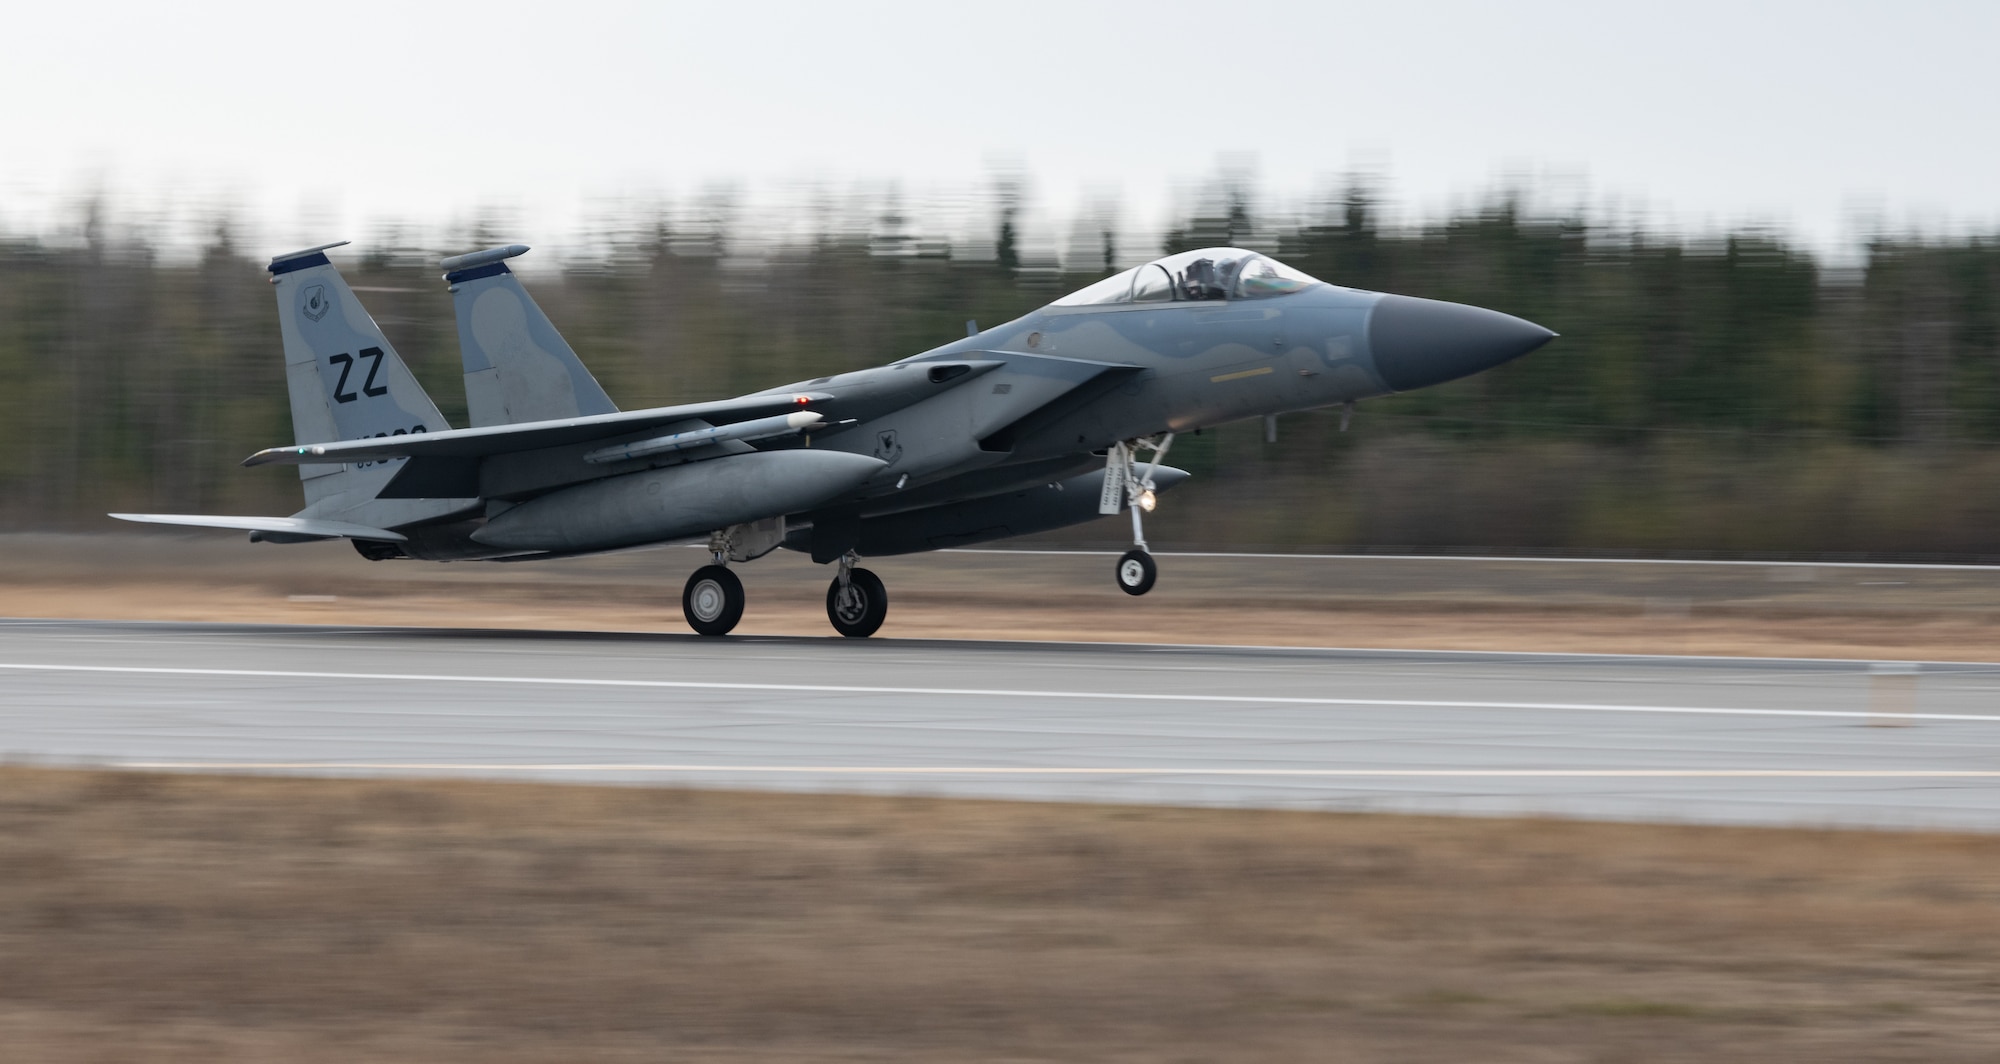 A U.S. Air Force F-15 Eagle assigned to the 44th Fighter Squadron from Kadena Air Base, Japan, lands in preparation for Northern Edge, May 8, 2019, at Eielson Air Force Base, Alaska, 2019.